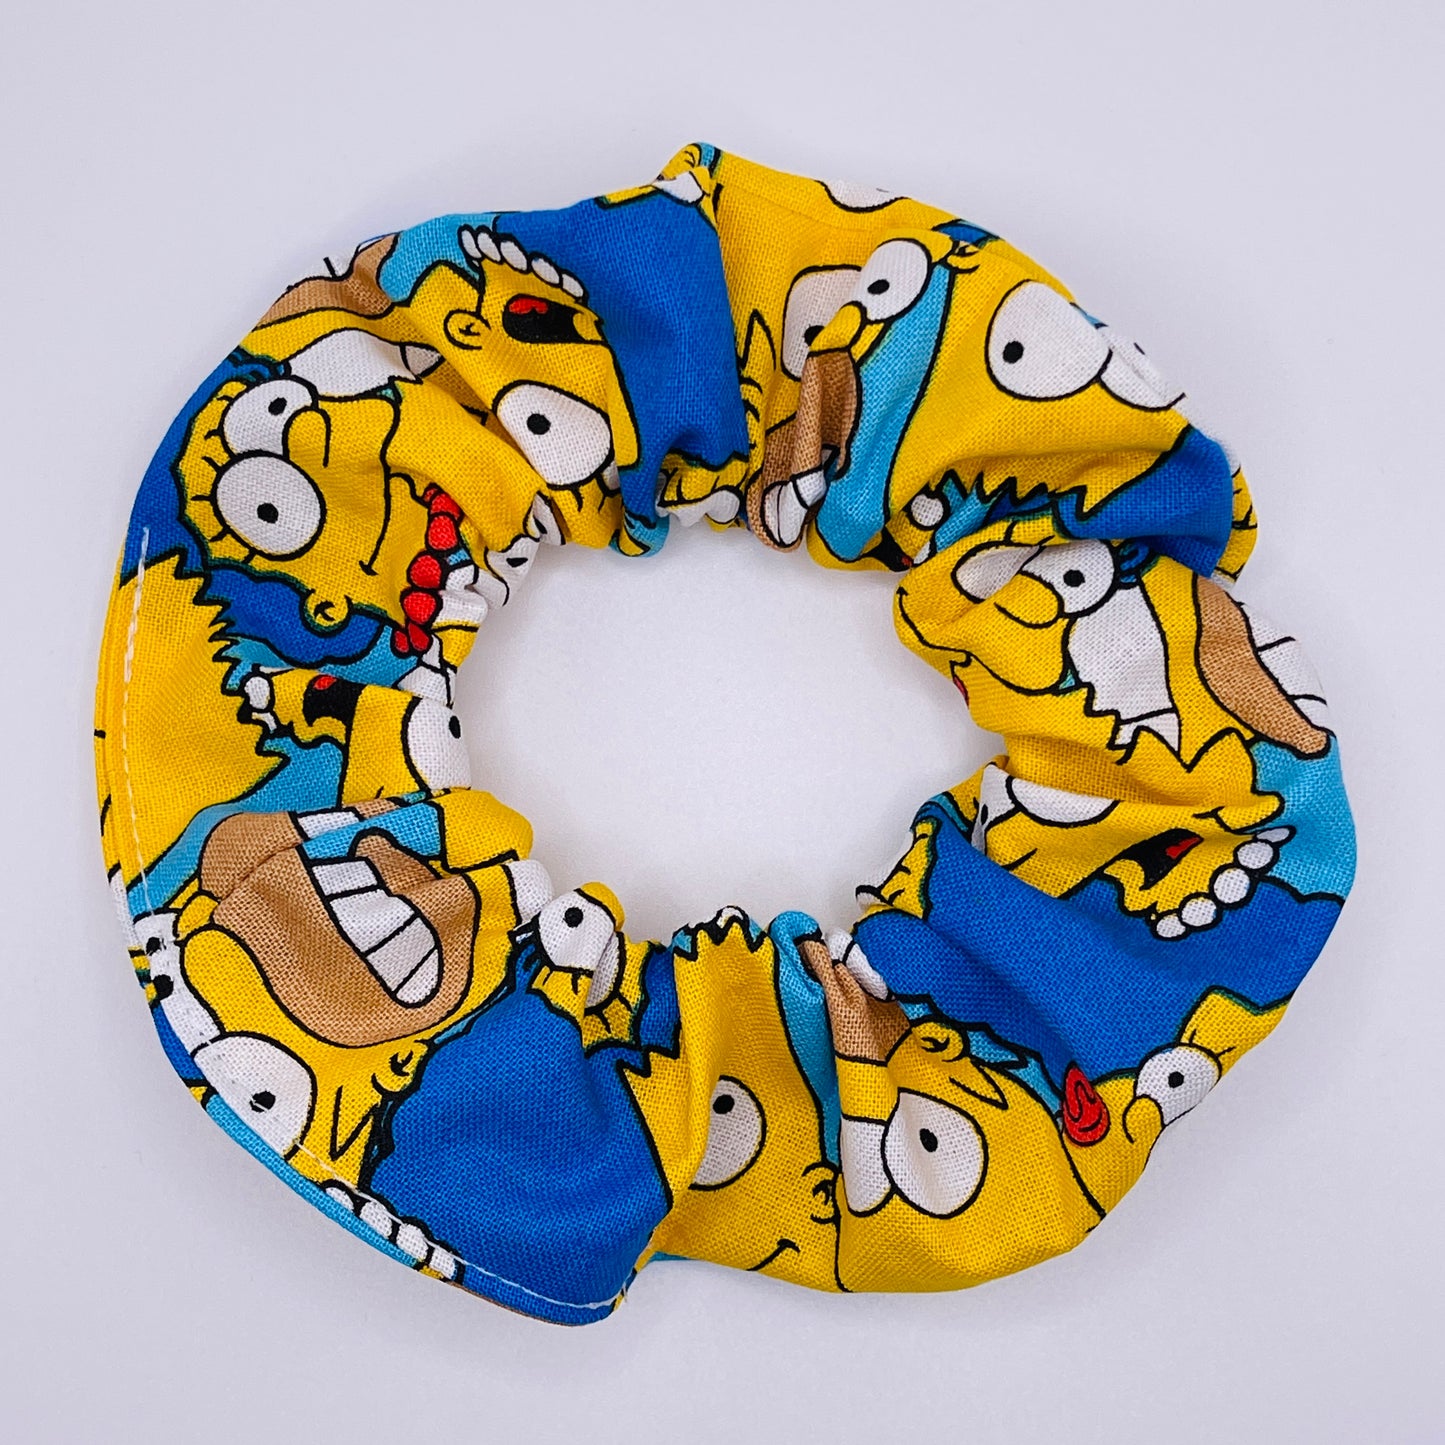 The Simpsons Scrunchies